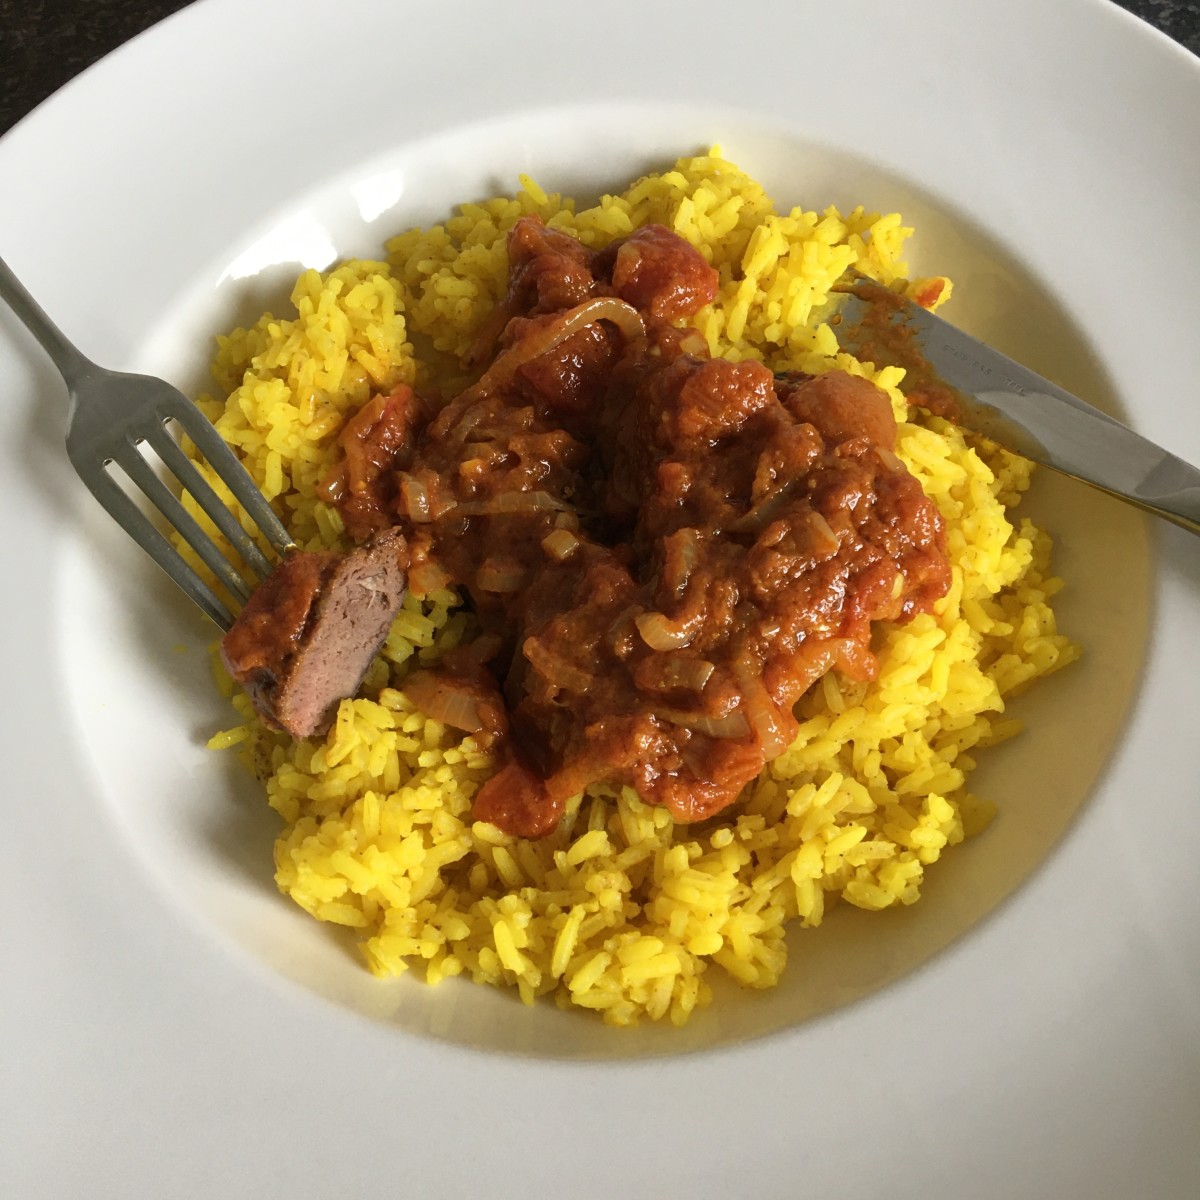 Pigeon breasts with simple Madras curry sauce is served on a bed of turmeric and garlic rice